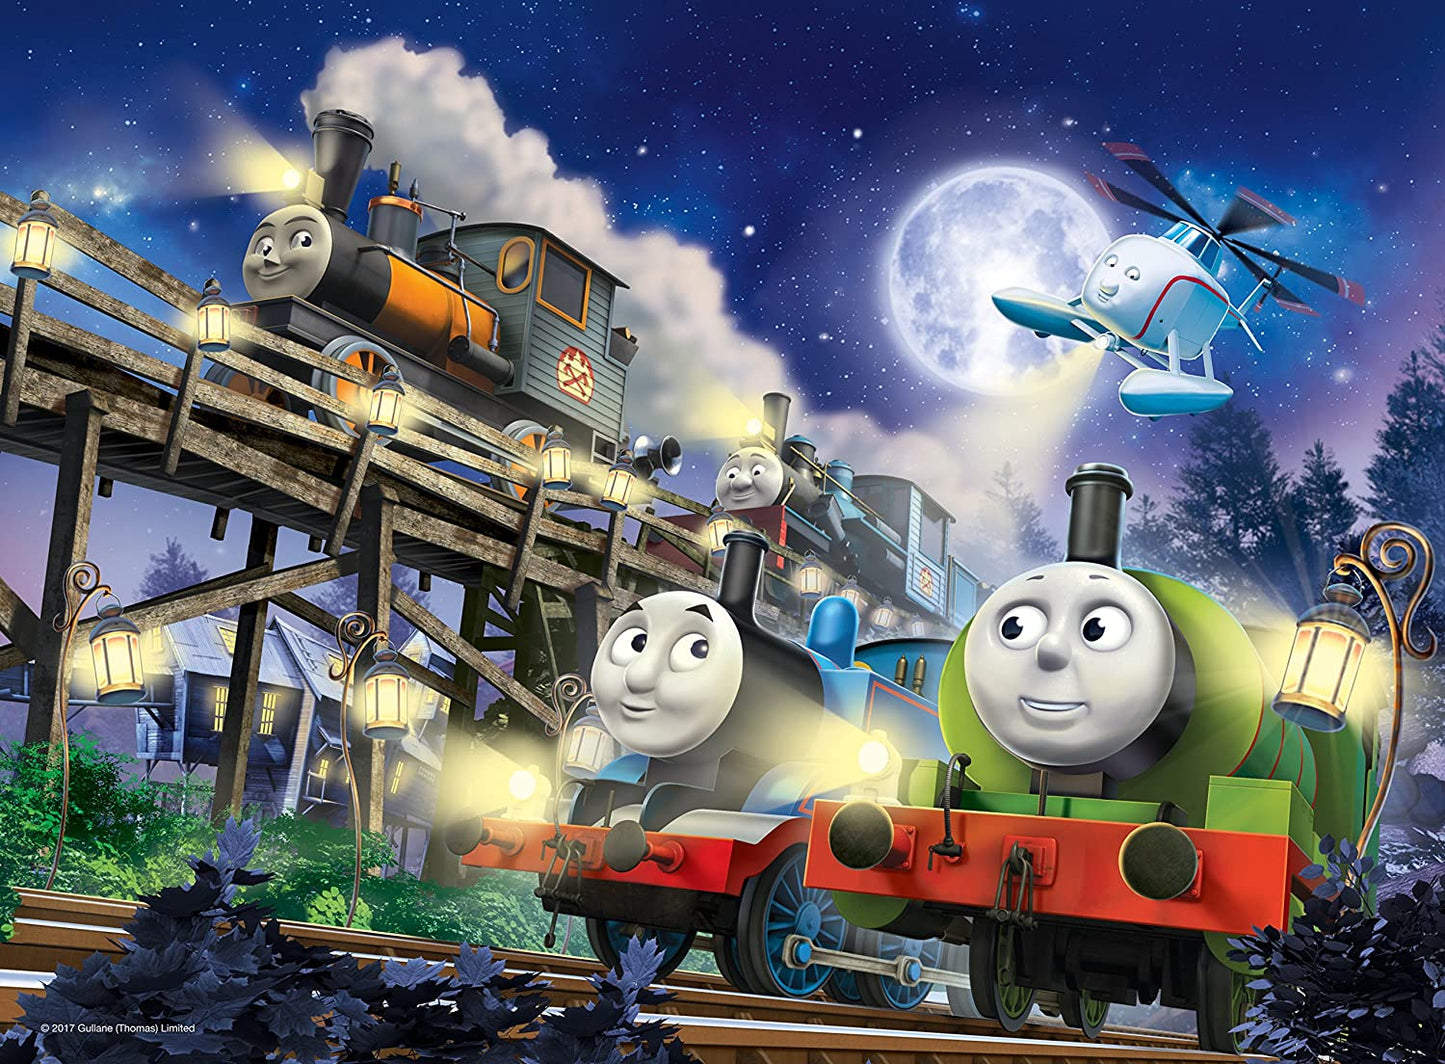 Ravensburger - Thomas & Friends Glow in The Dark - 60 Extra Large Piece Jigsaw Puzzle